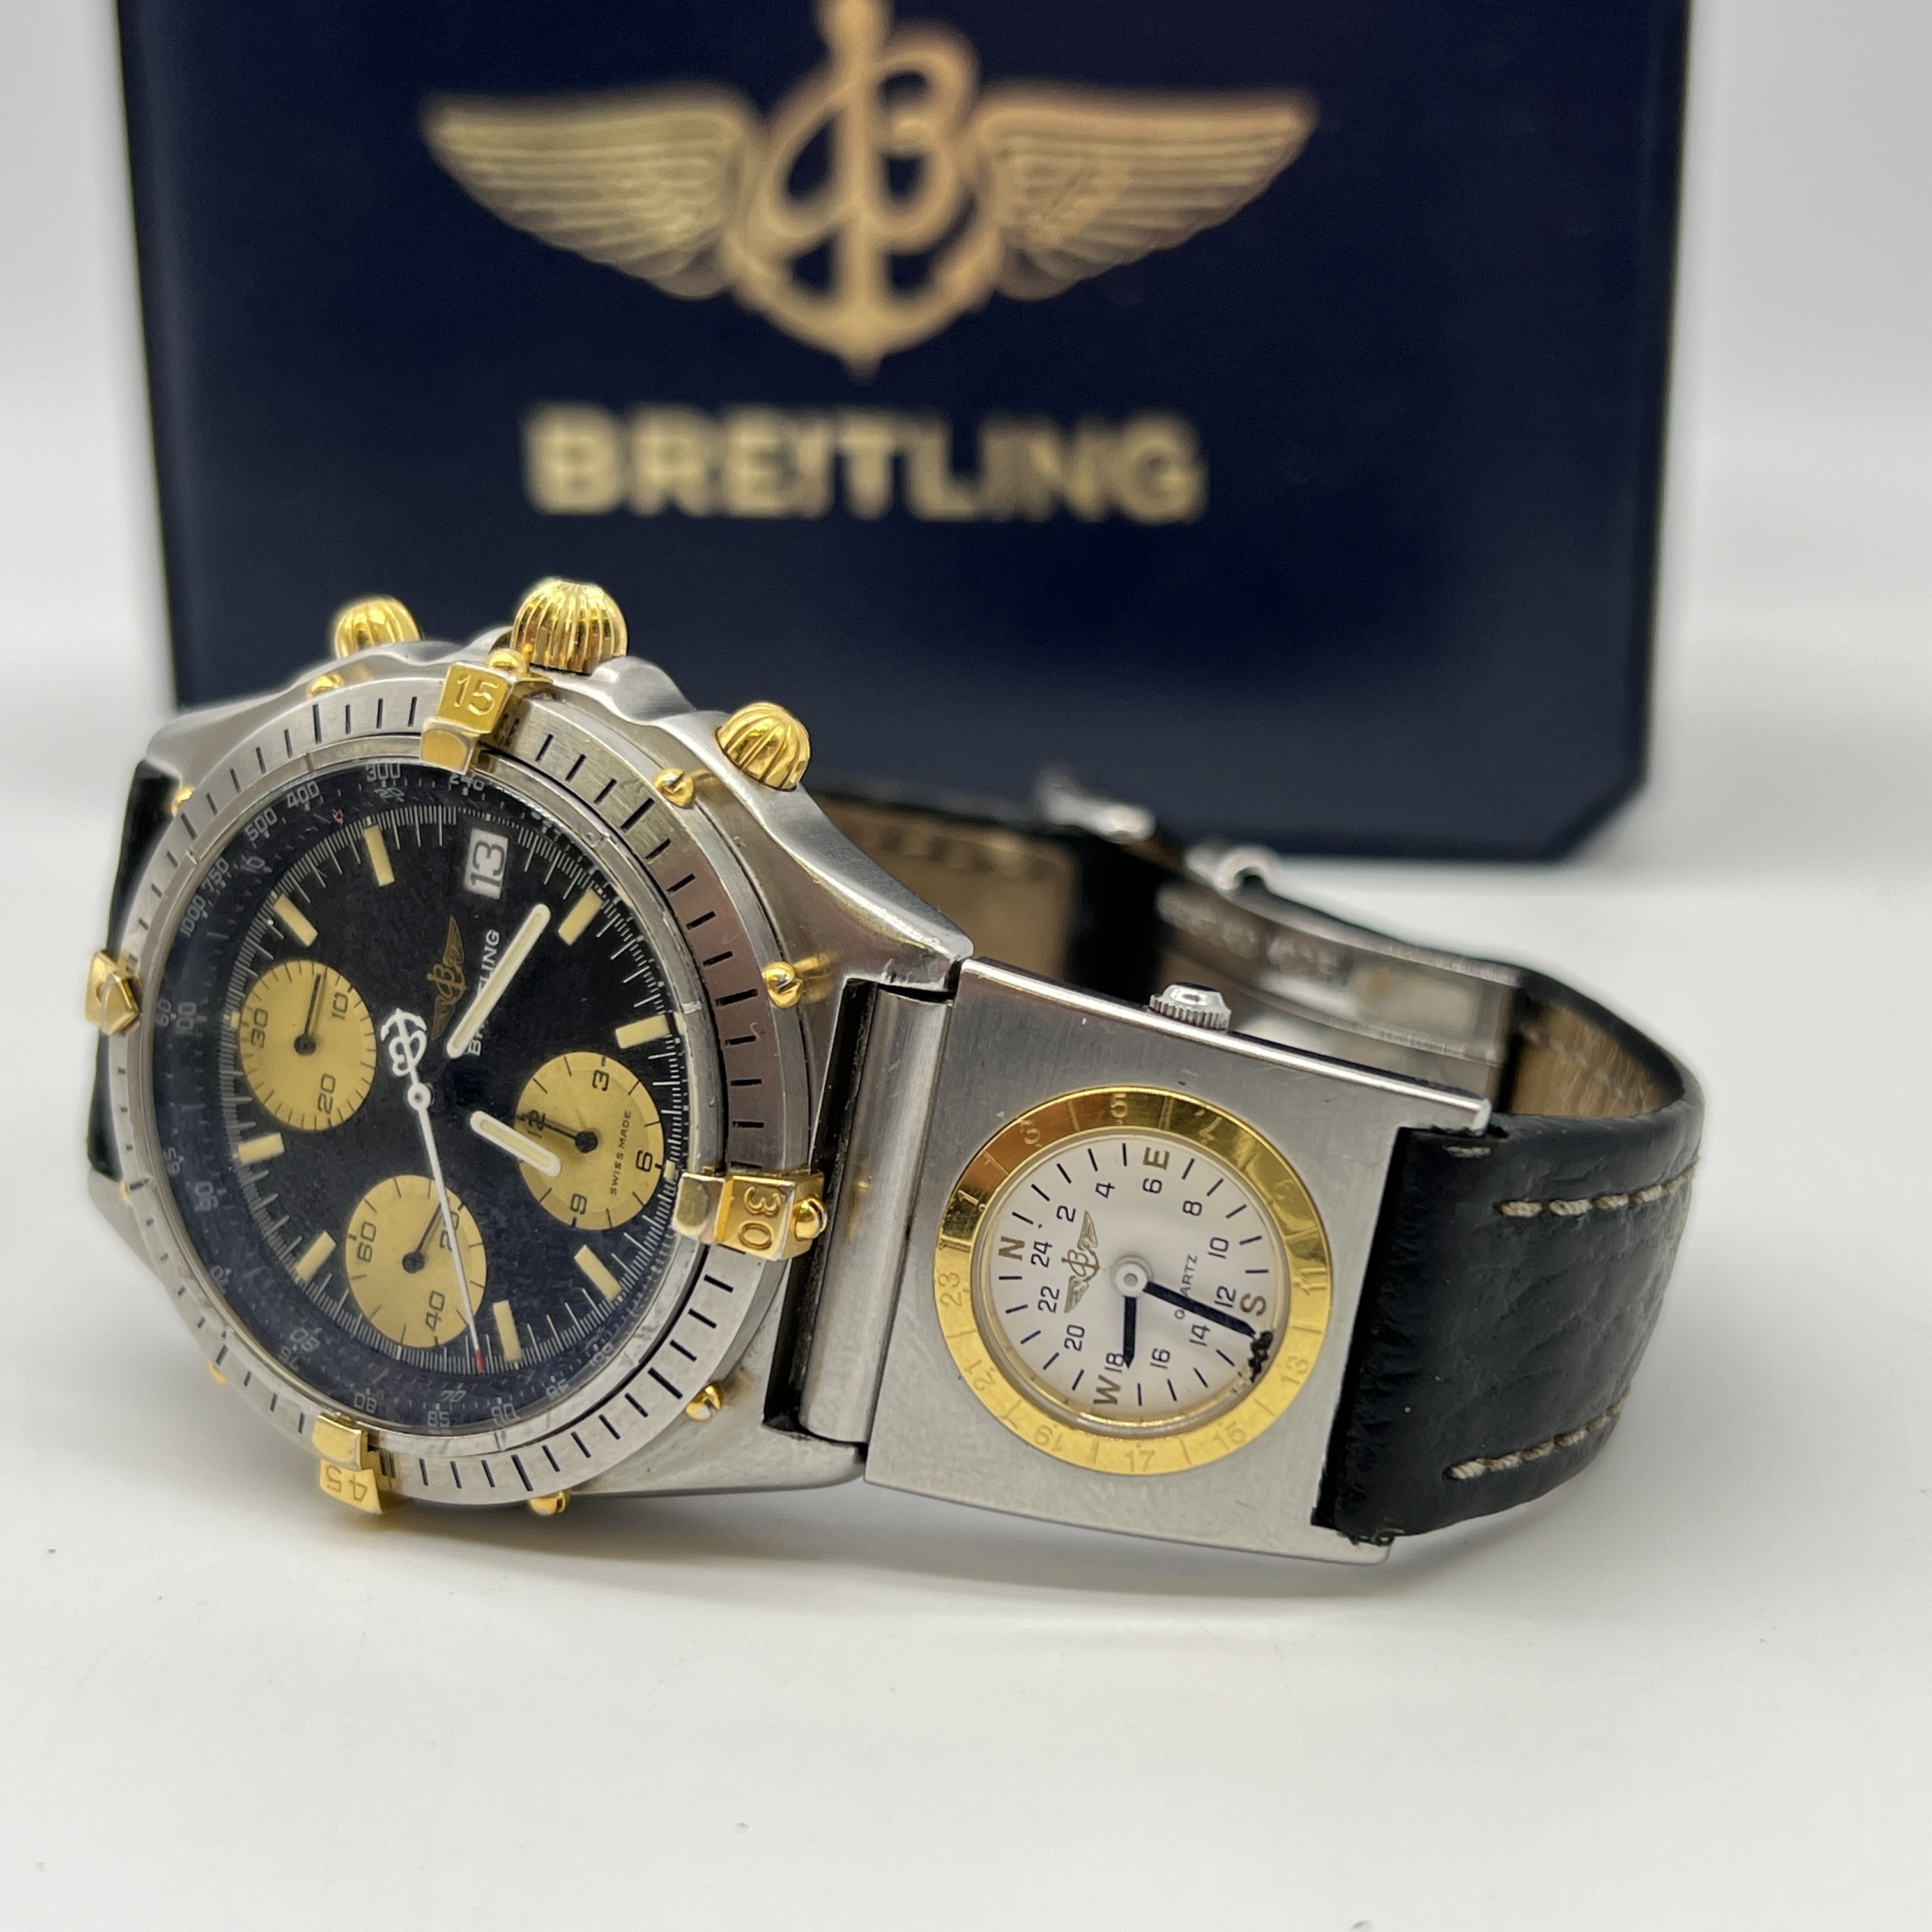 A Breitling chronograph stainless steel and gold watch - Image 7 of 11